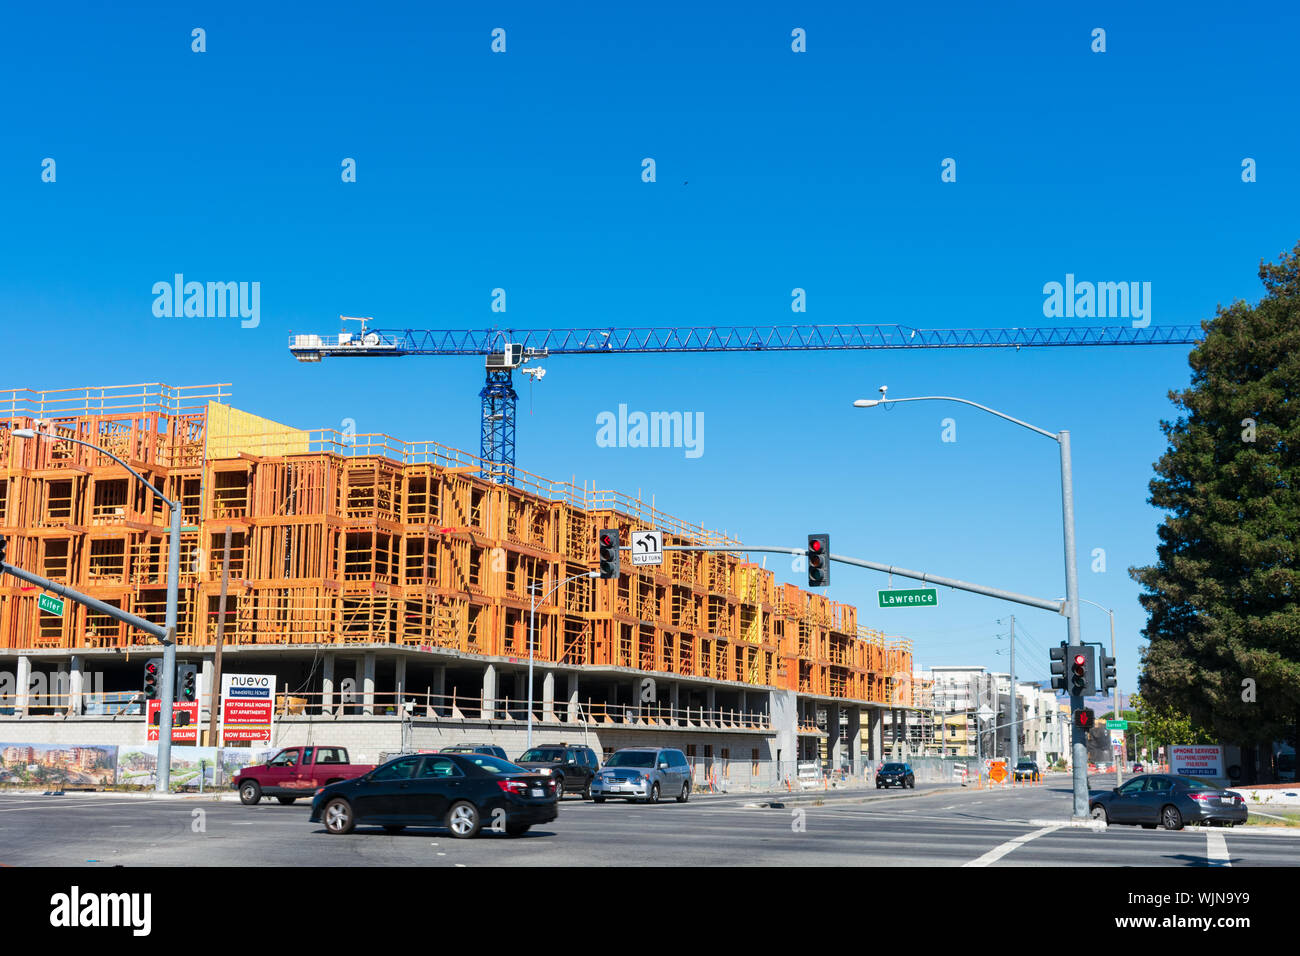 Street view of new residential construction Nuevo by SummerHill Home builder in Silicon Valley near the Lawrence train station Stock Photo